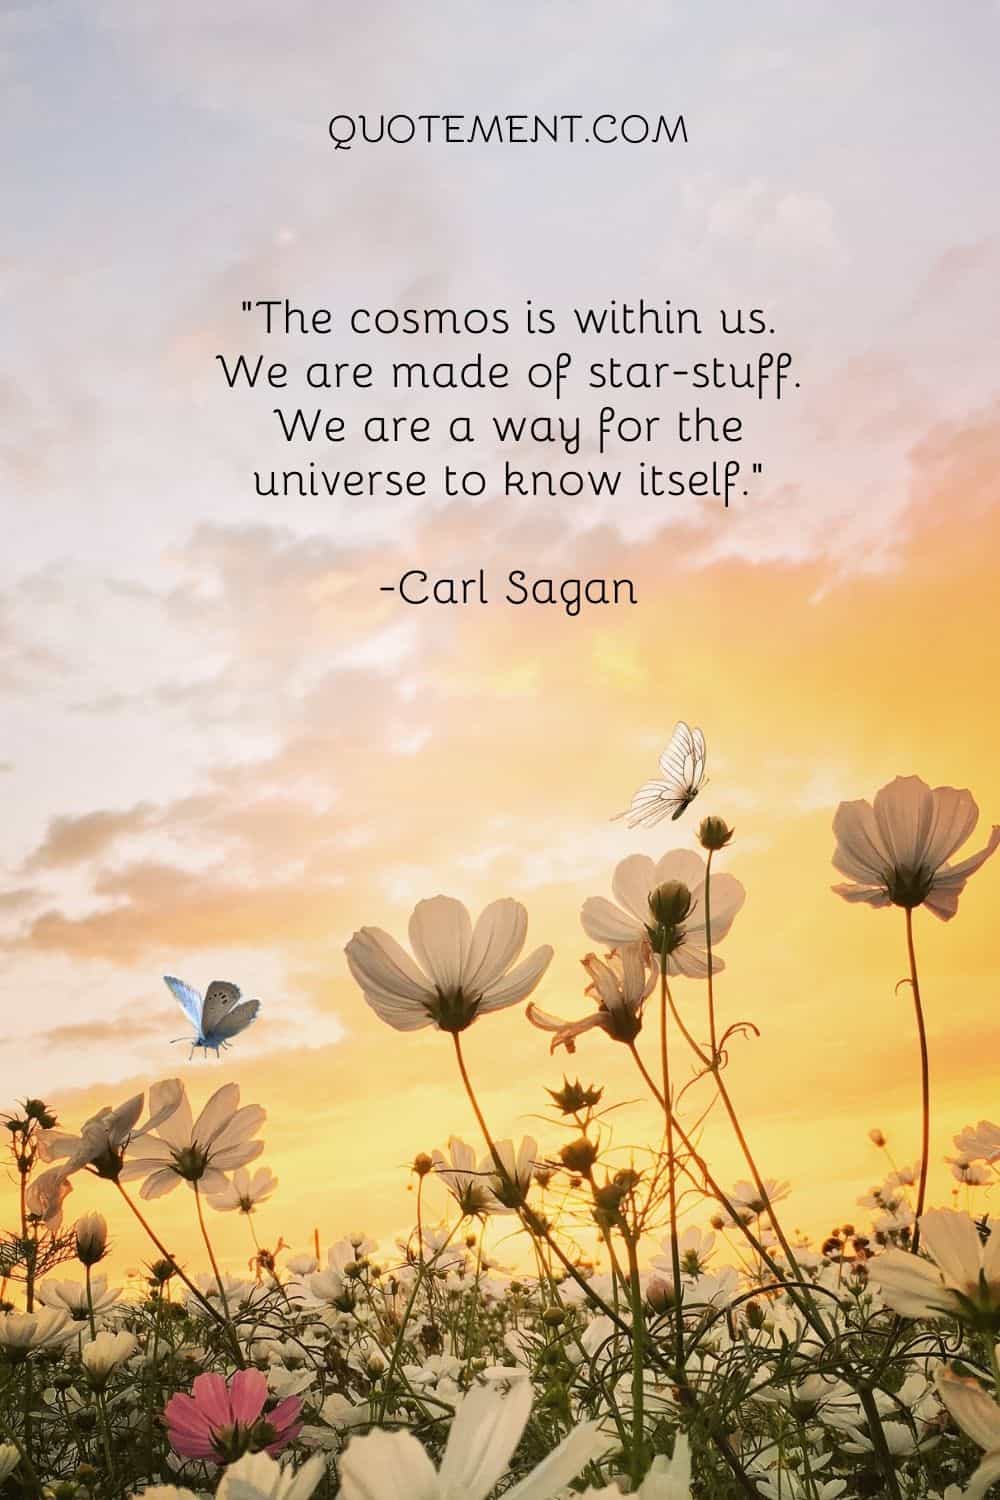 We are a way for the universe to know itself.